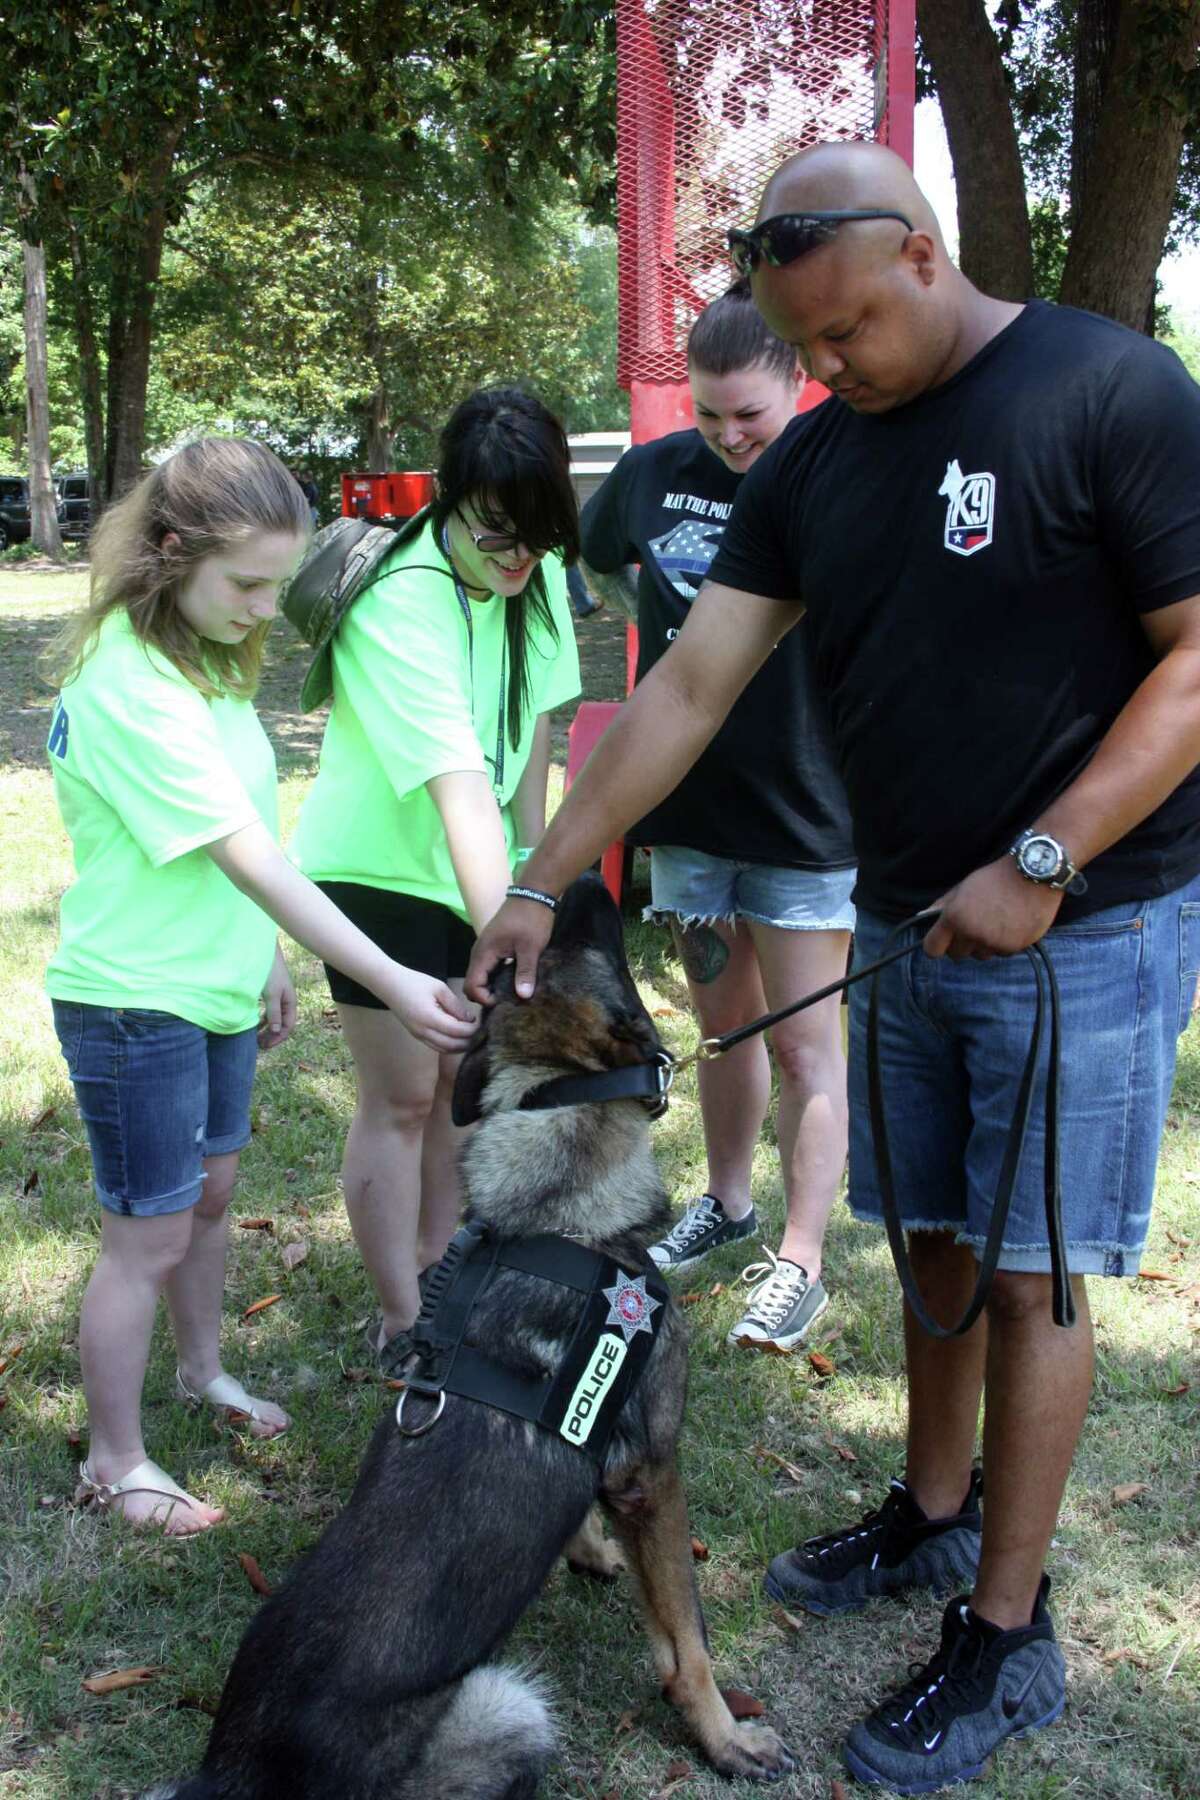 Michael St. Romaine, an officer with Splendora Police Department, brought about K-9 A.D., for the fundraiser for Roman Forest Police Chief Stephen Carlisle on Saturday at Trinity Armory in Cleveland. A.D. was a hit with adults and child, and gladly allowed them to pet him before moving on to the next group of people.